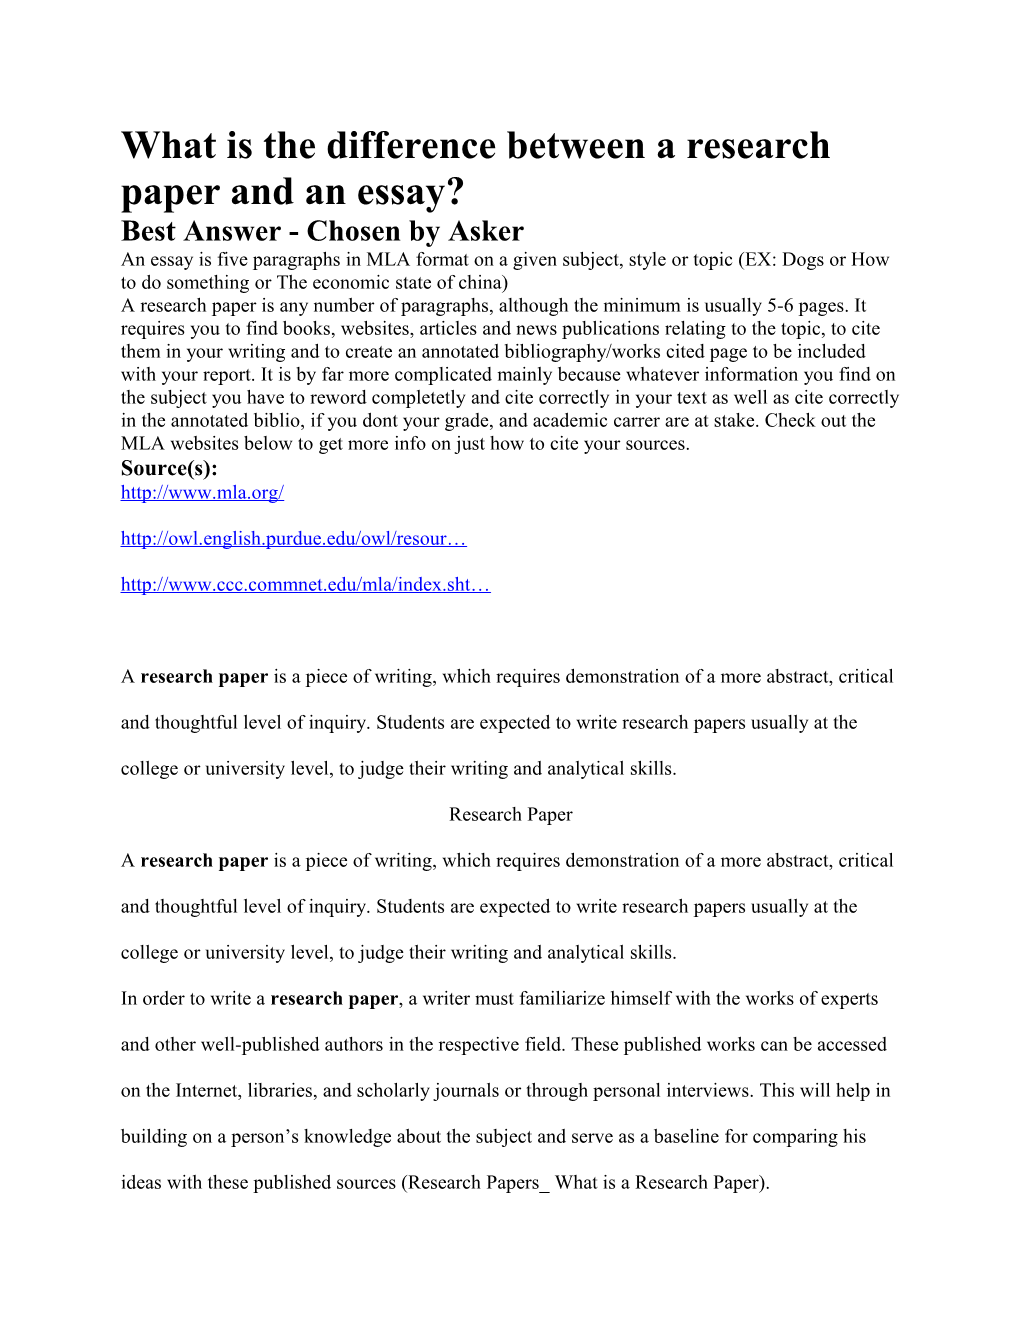 What Is the Difference Between a Research Paper and an Essay